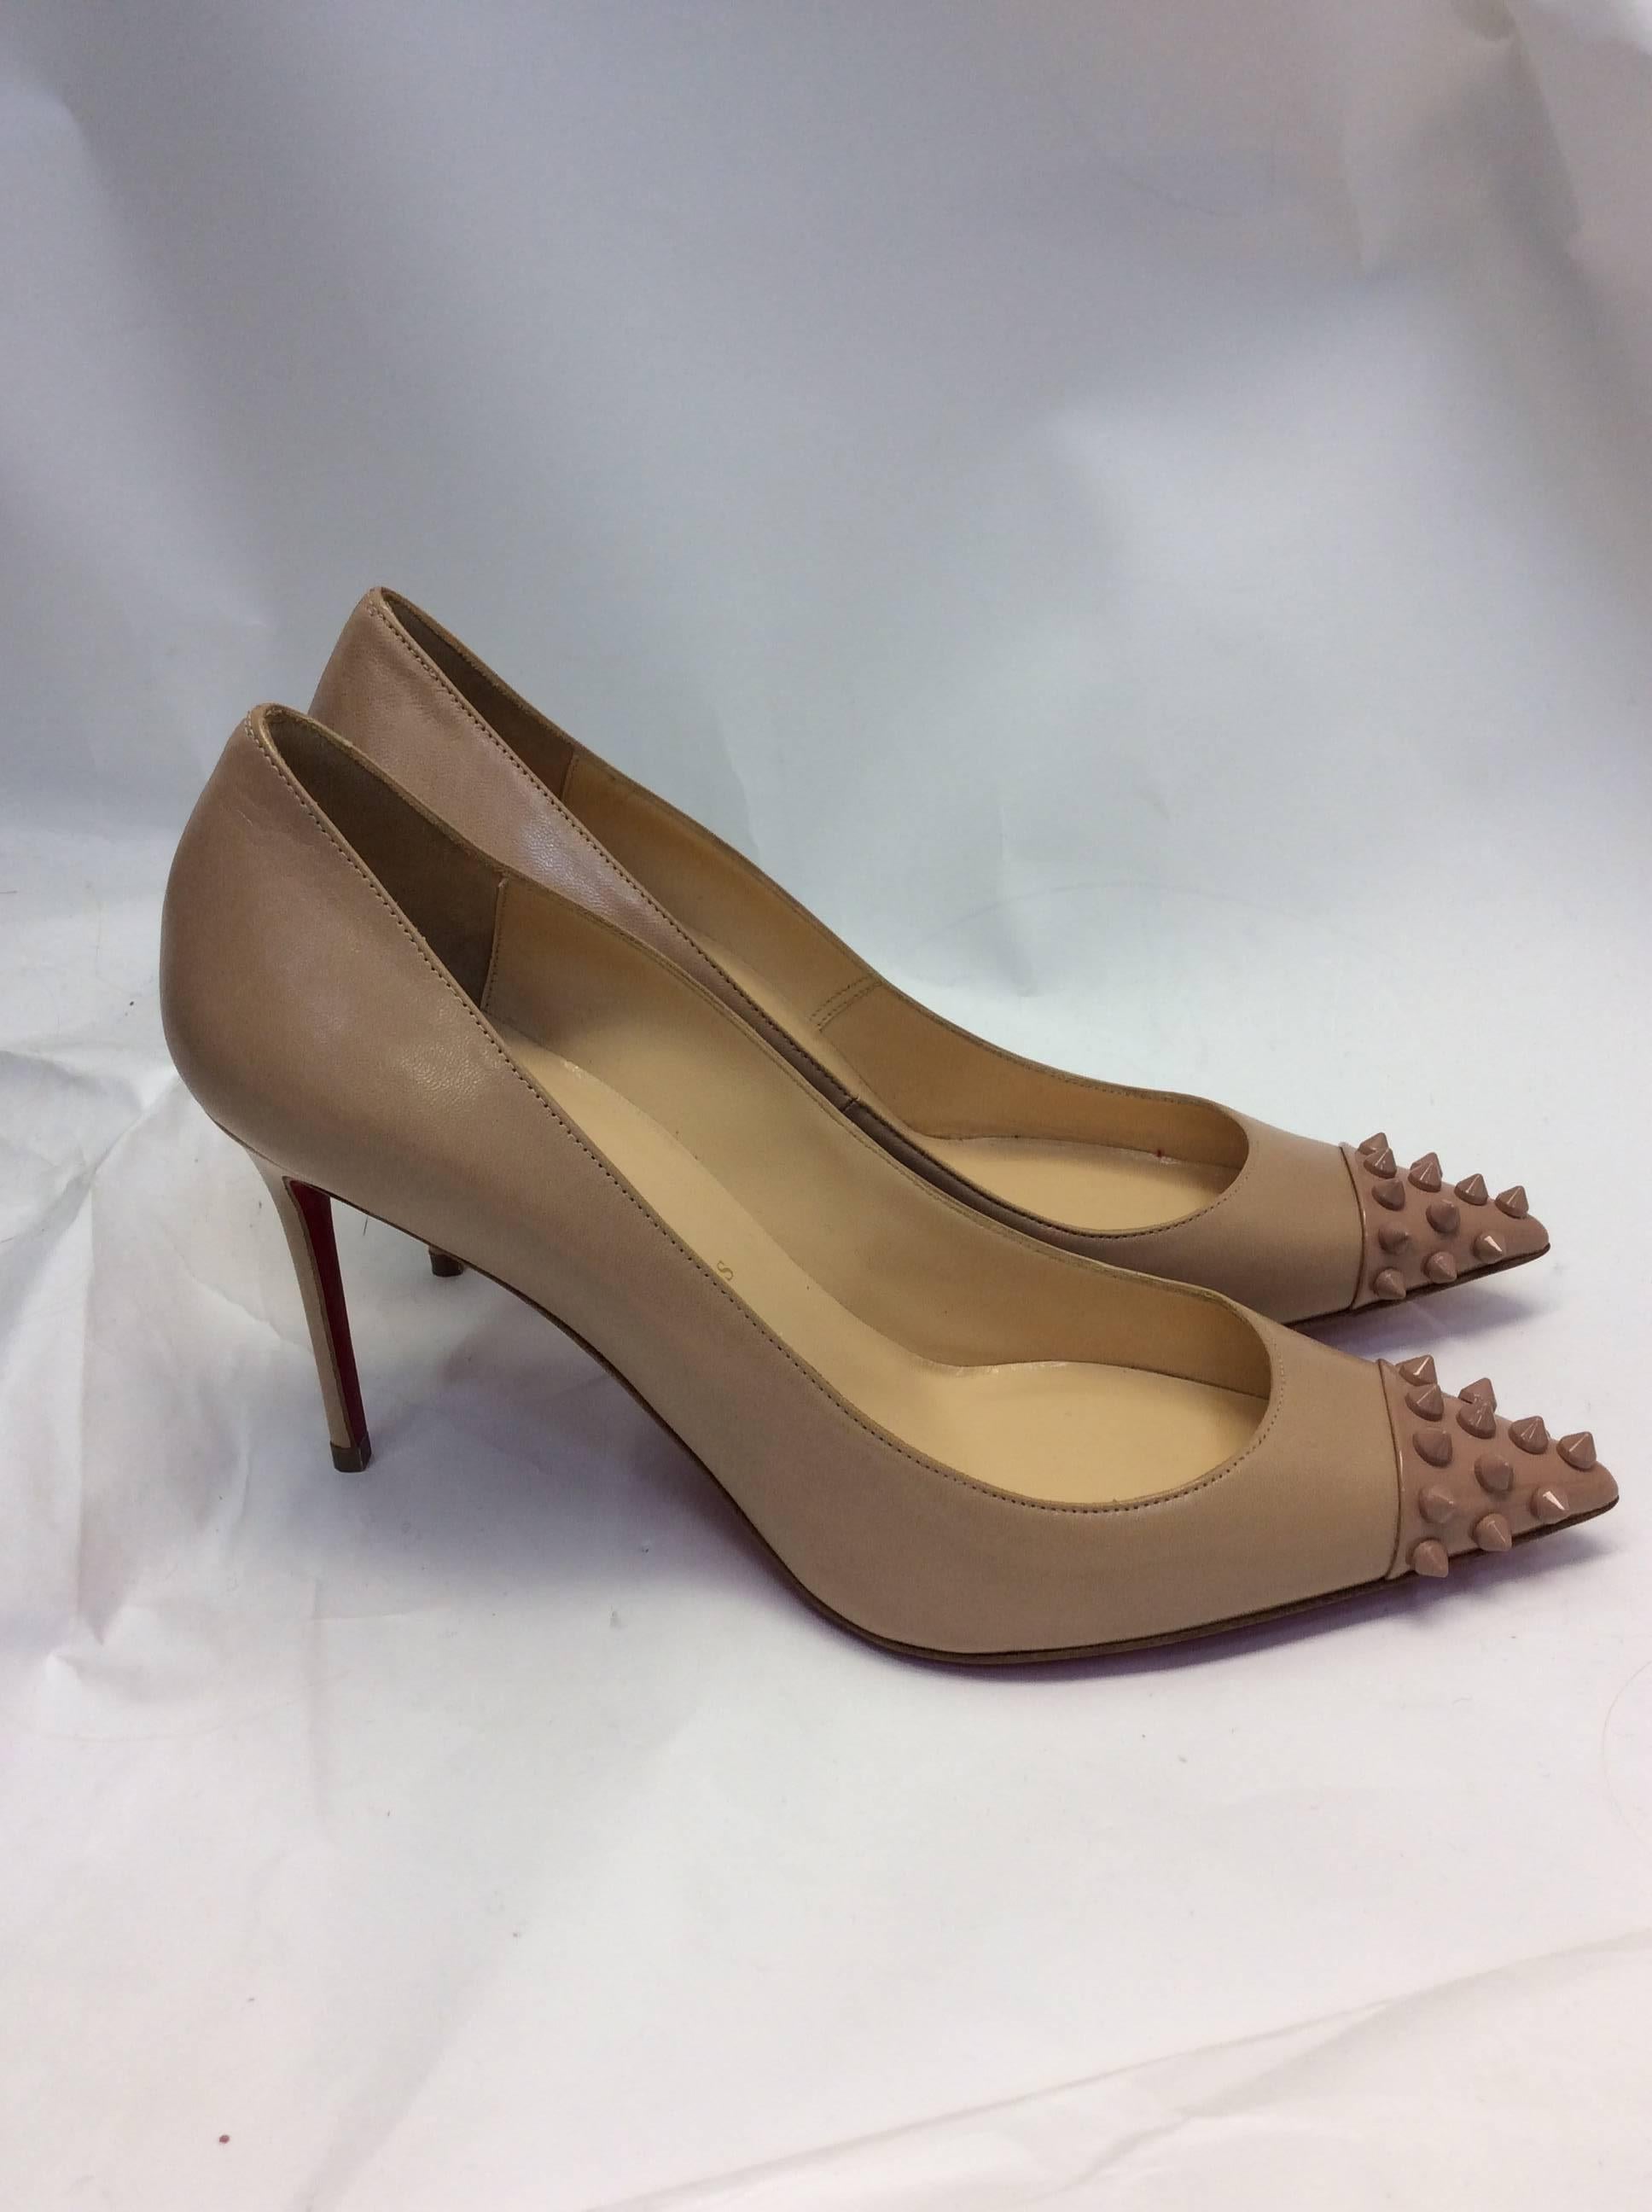 Women's Christian Louboutin New Nude Studded Stiletto For Sale